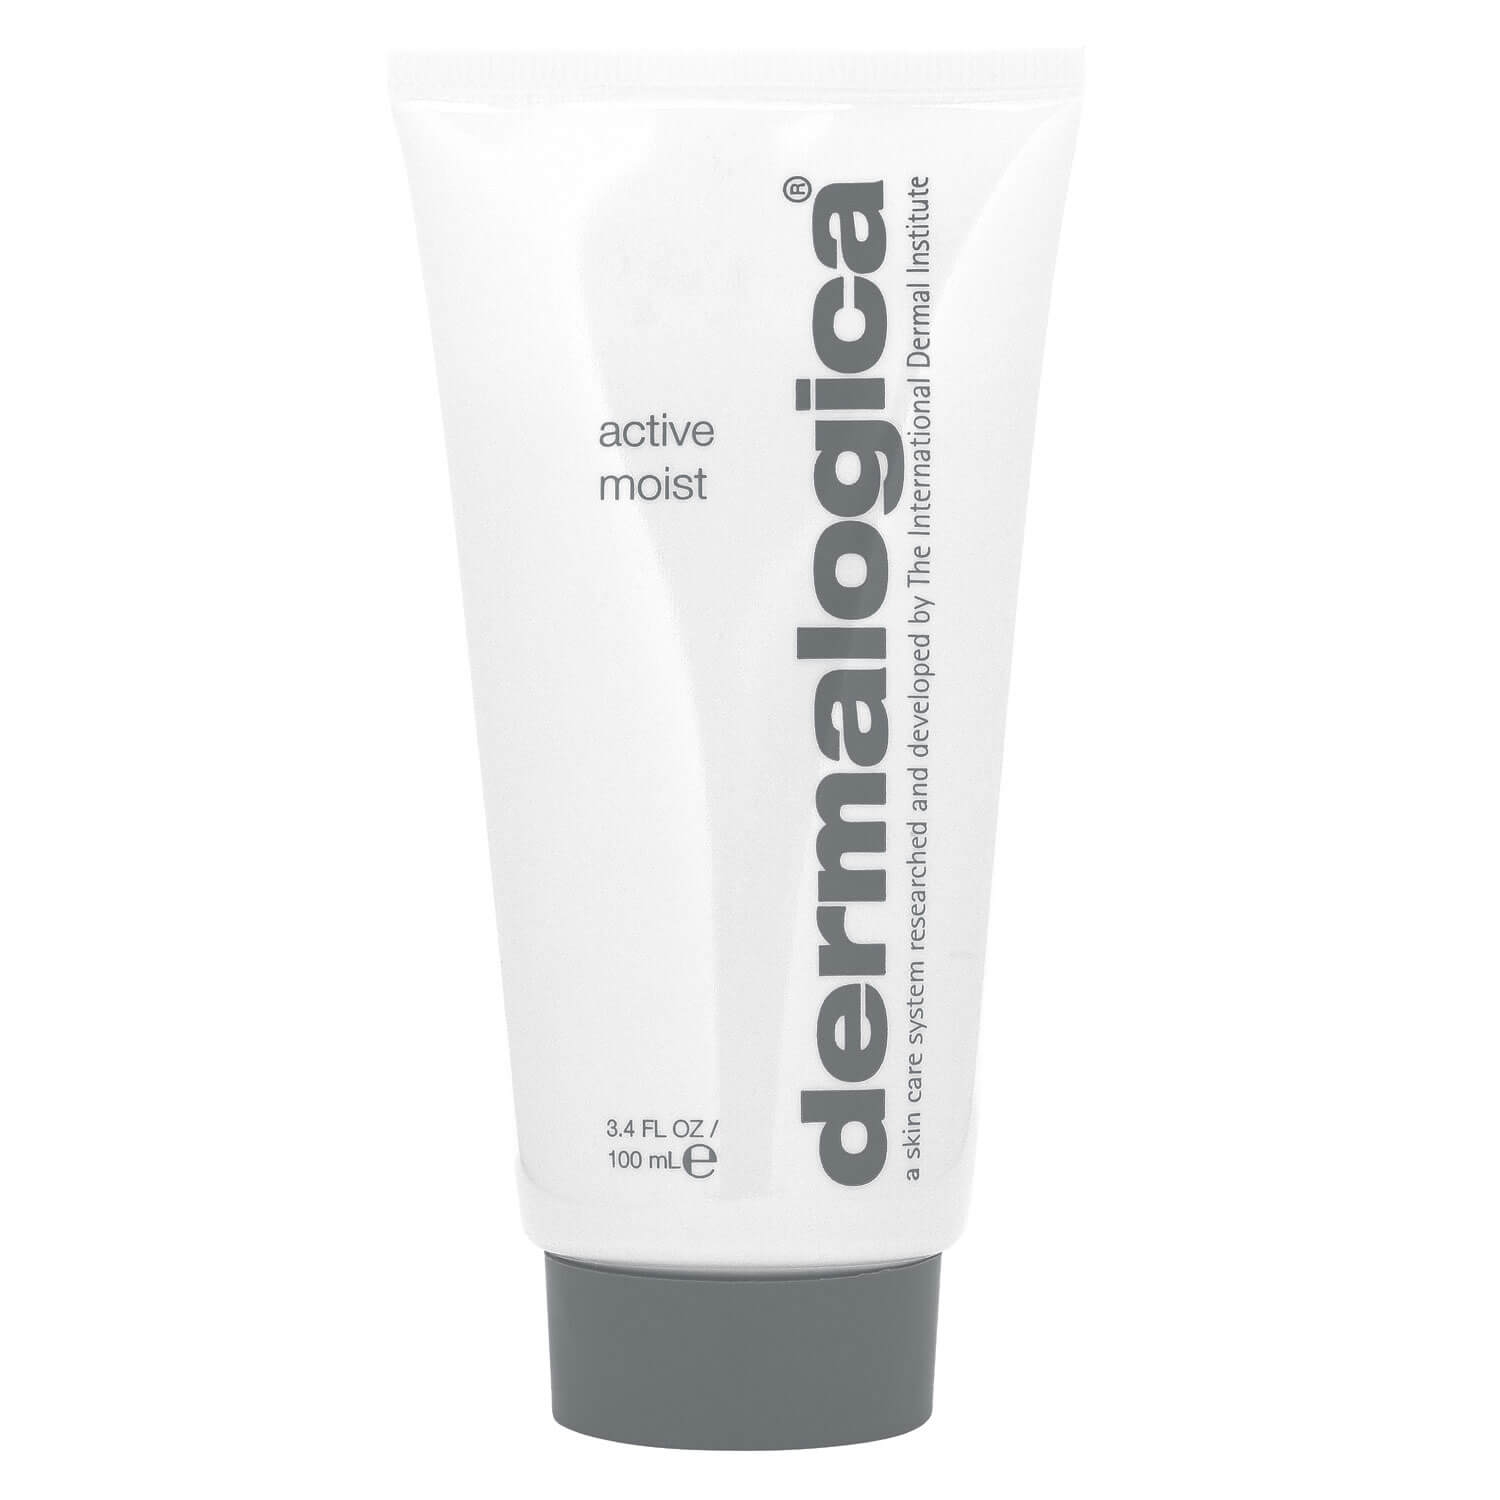 Product image from Moisturizers - Active Moist